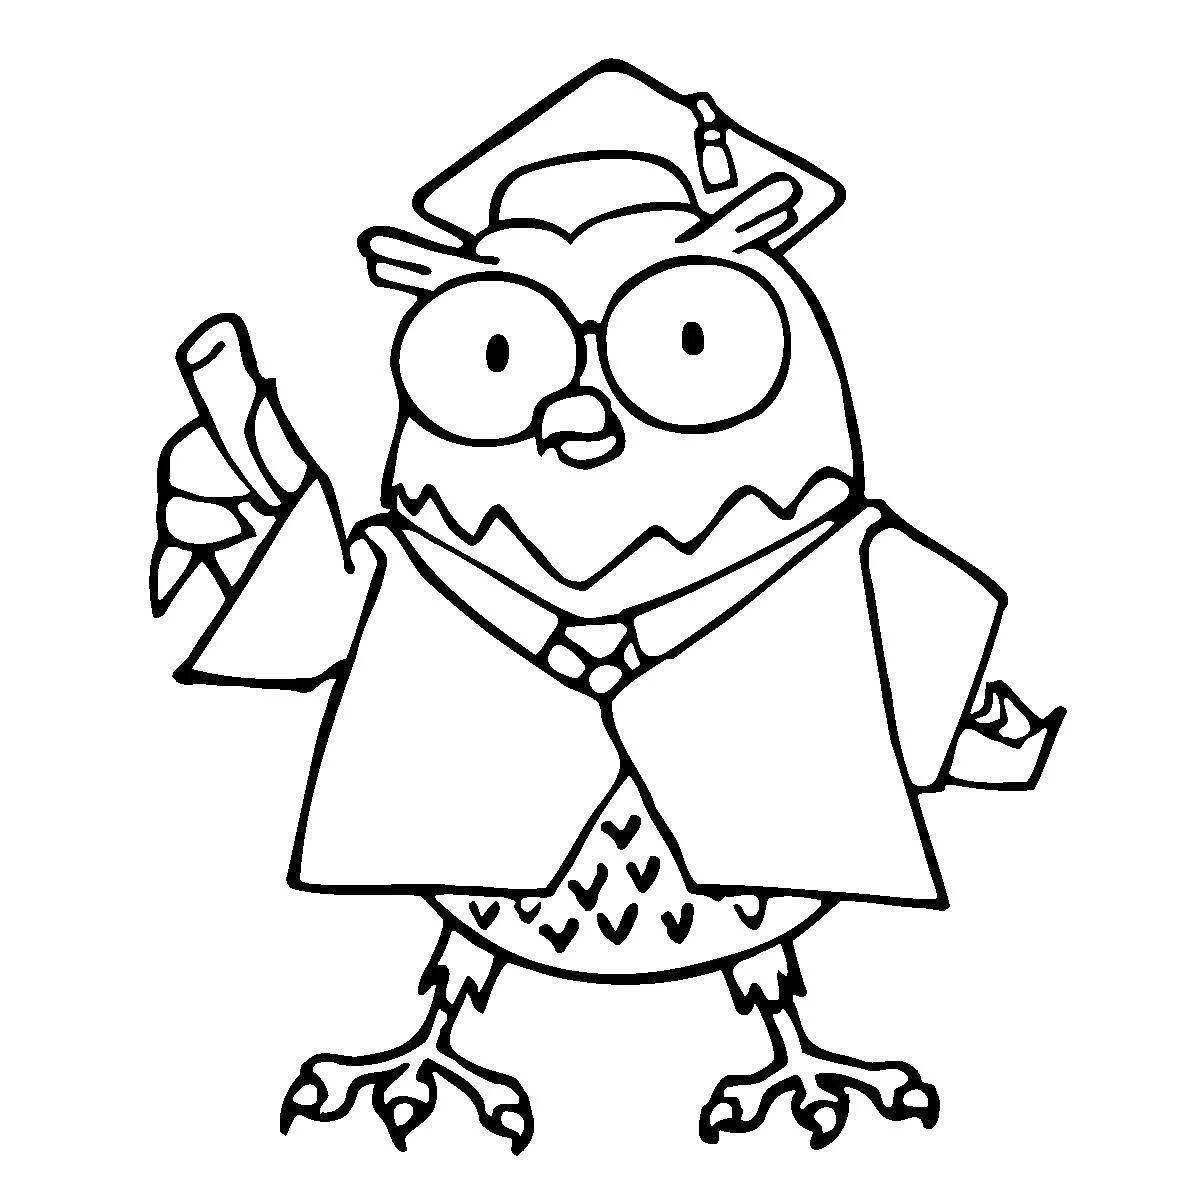 Fun coloring book wise owl for kids